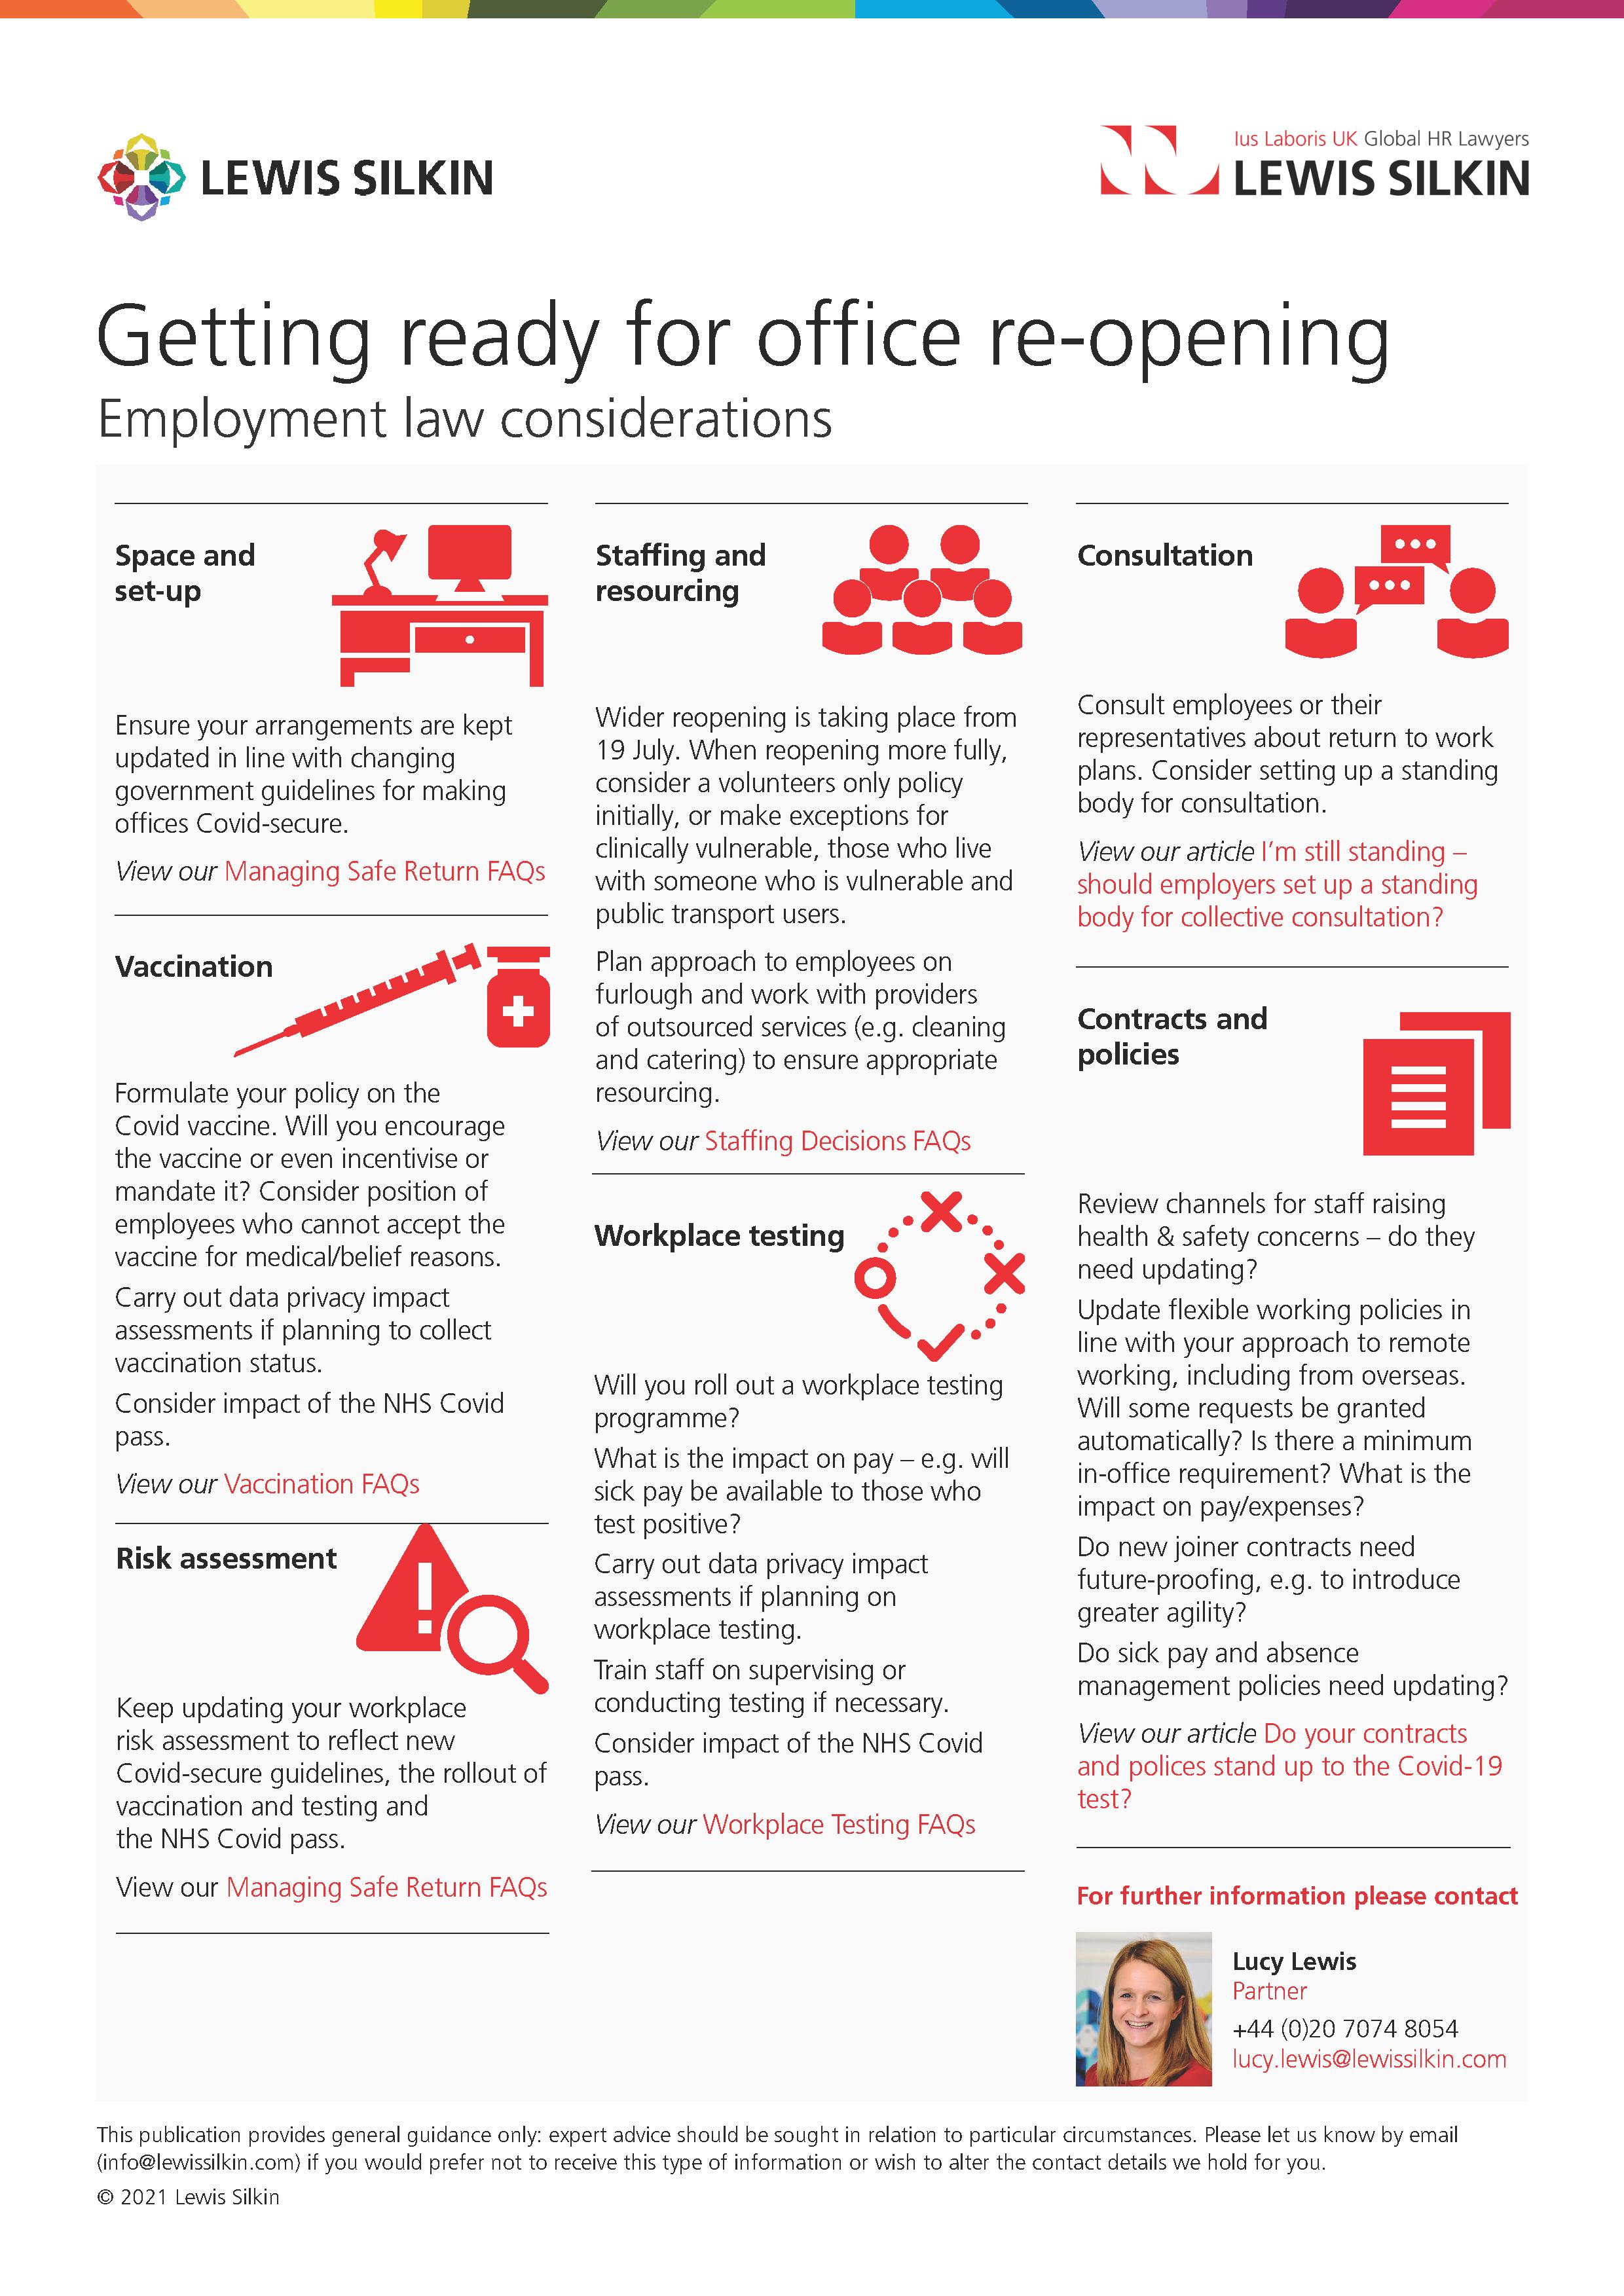 Getting ready for office reopening - Employment law considerations infographic